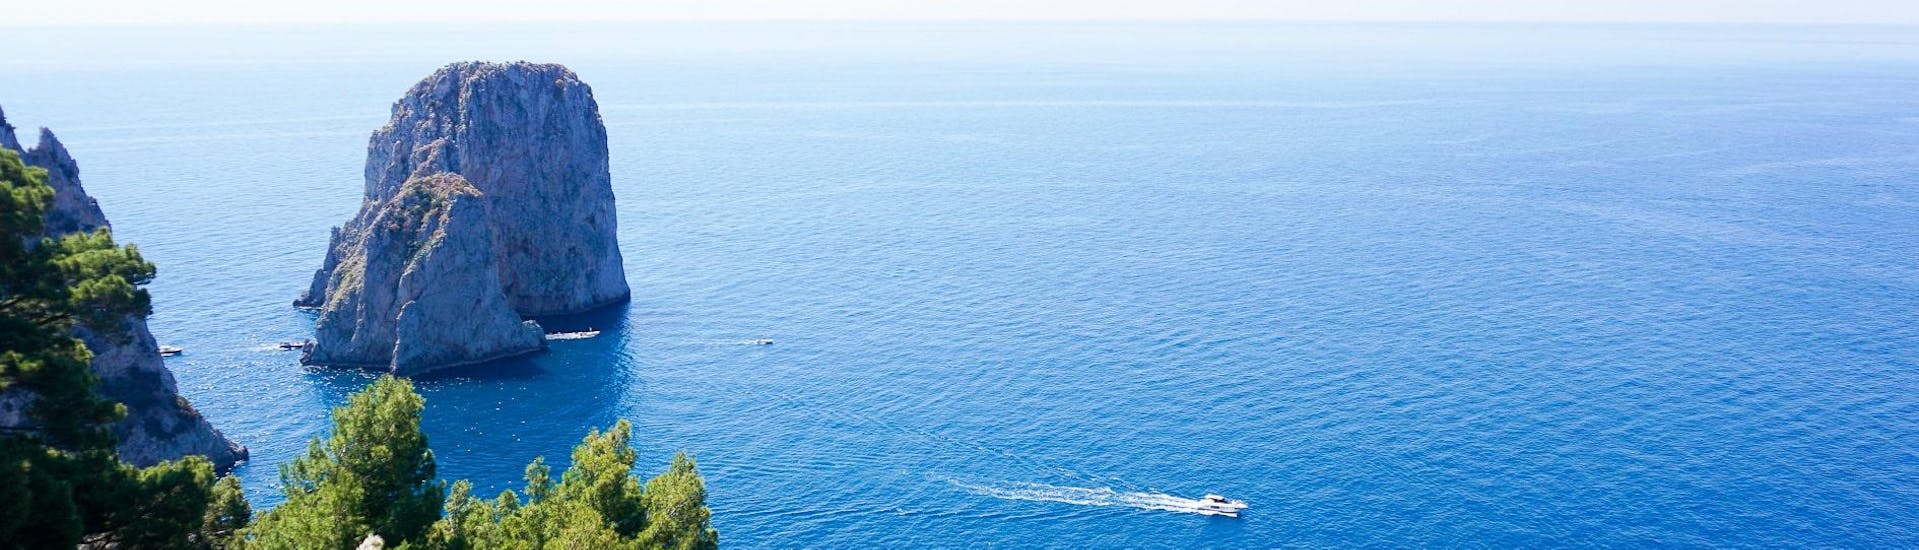 Ideal weather for the Half-Day Boat Trip from Sorrento to Capri incl. Blue Grotto.